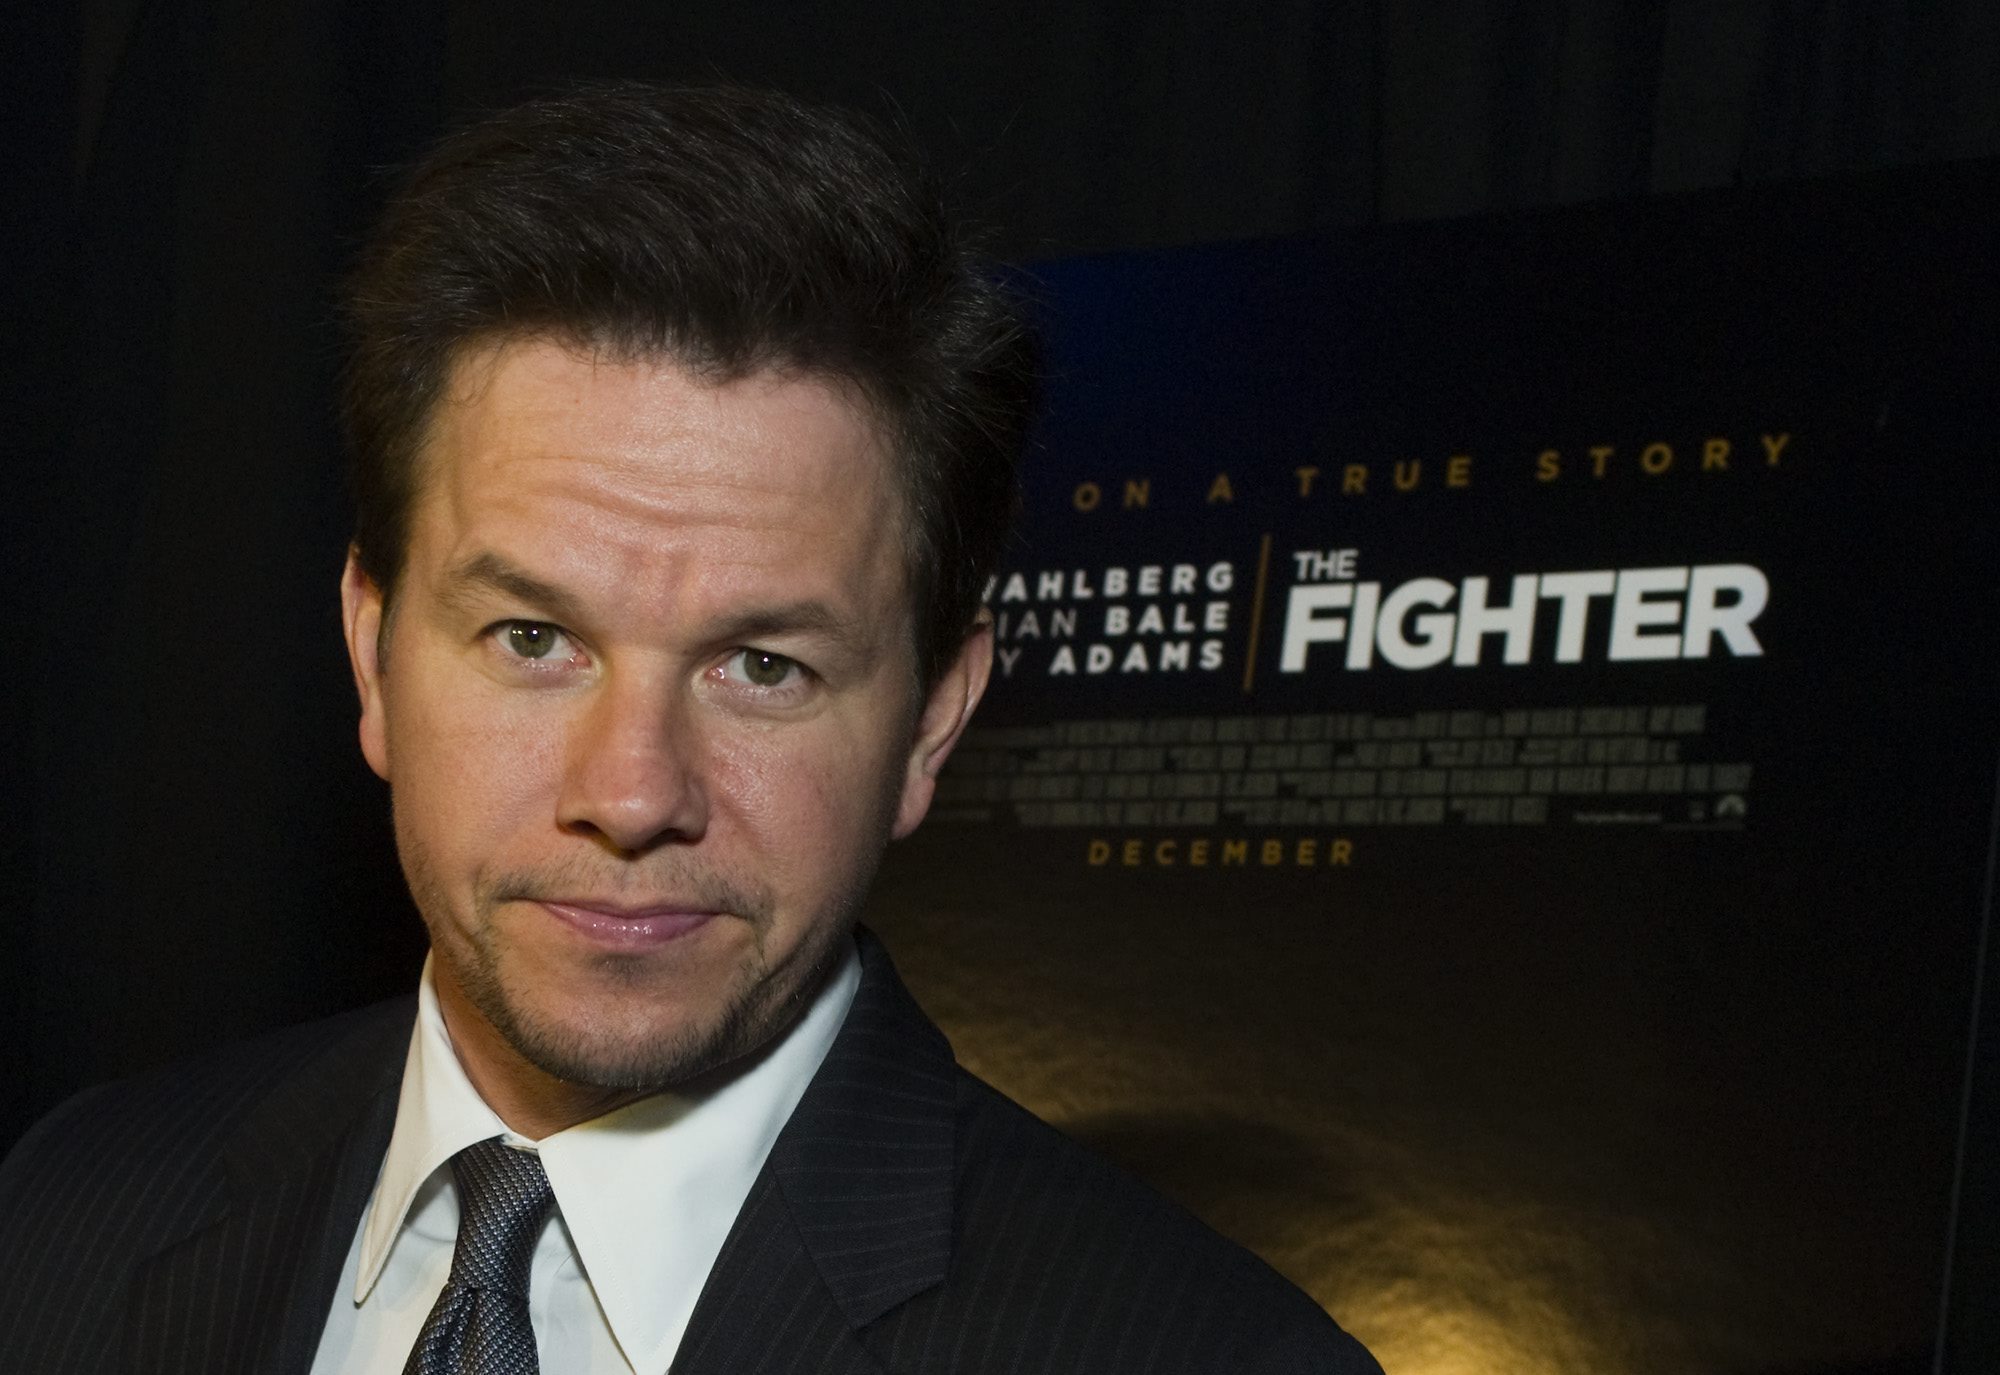 Christian Bale, Mark Wahlberg, The Fighter, Mickey Ward